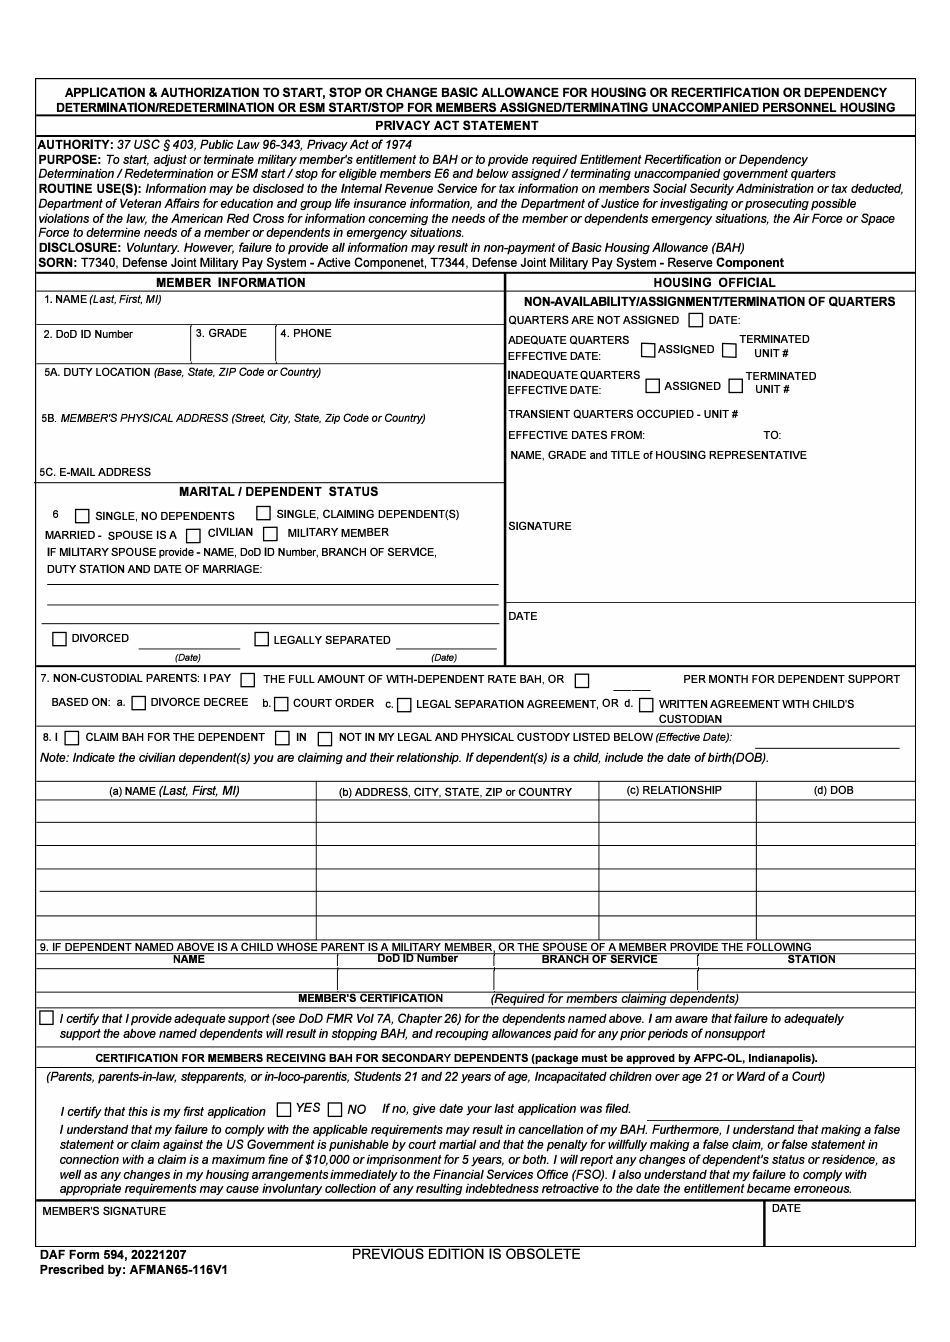 DAF Form 594 Application and Authorization to Start, Stop or Change Basic Allowance for Housing or Recertification or Dependency Determination / Redetermination or Esm Start / Stop for Members Assigned / Terminating Unaccompanied Pesonnel Housing, Page 1